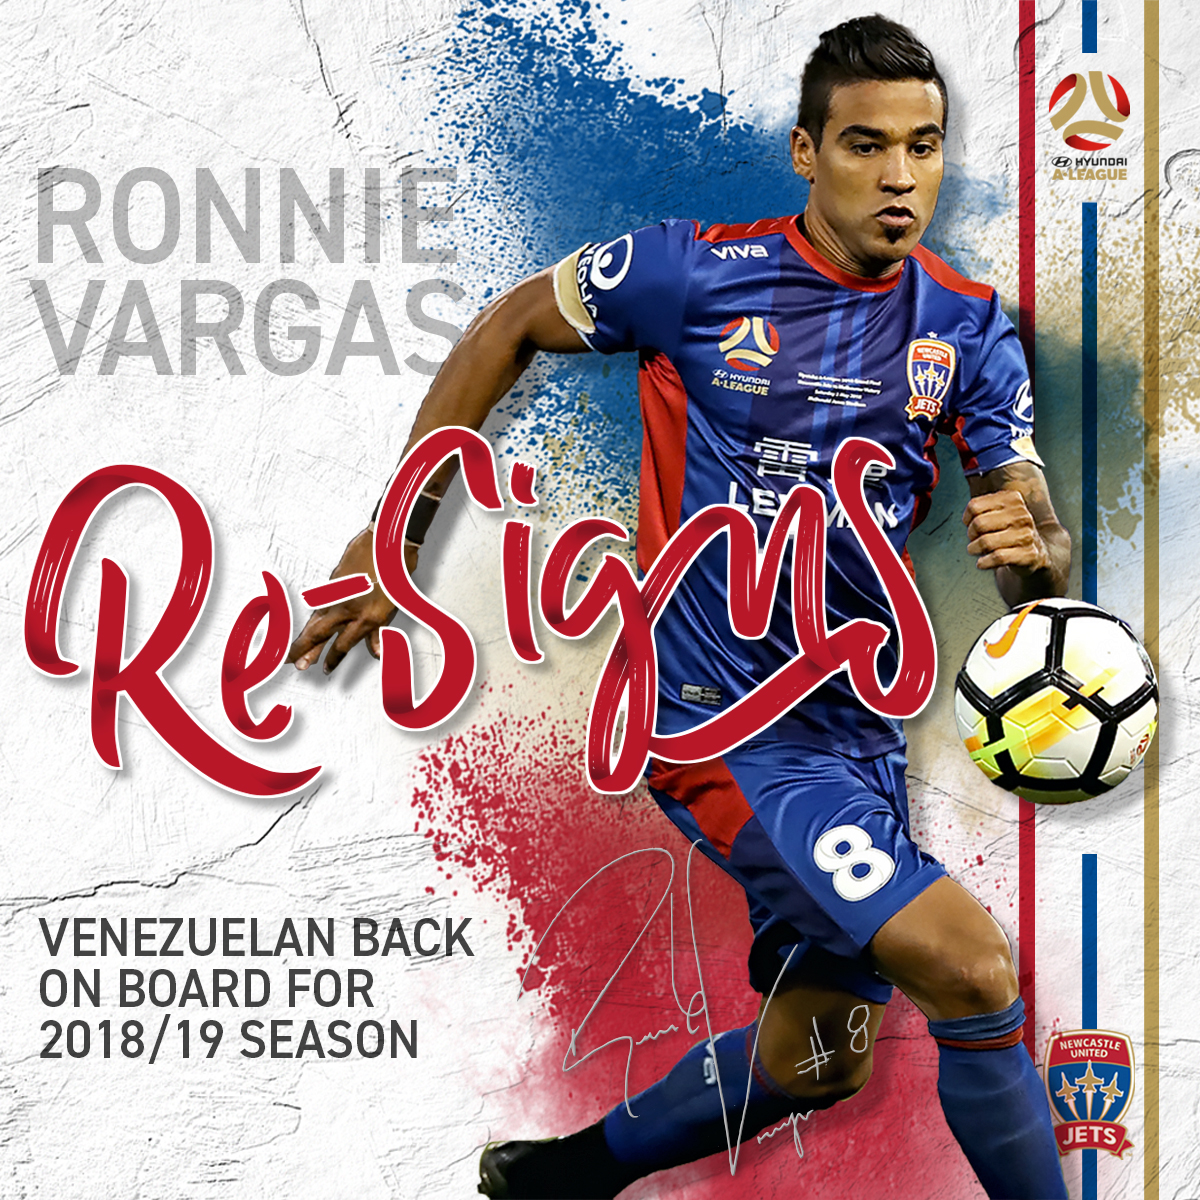 Ronald Vargas re-signs